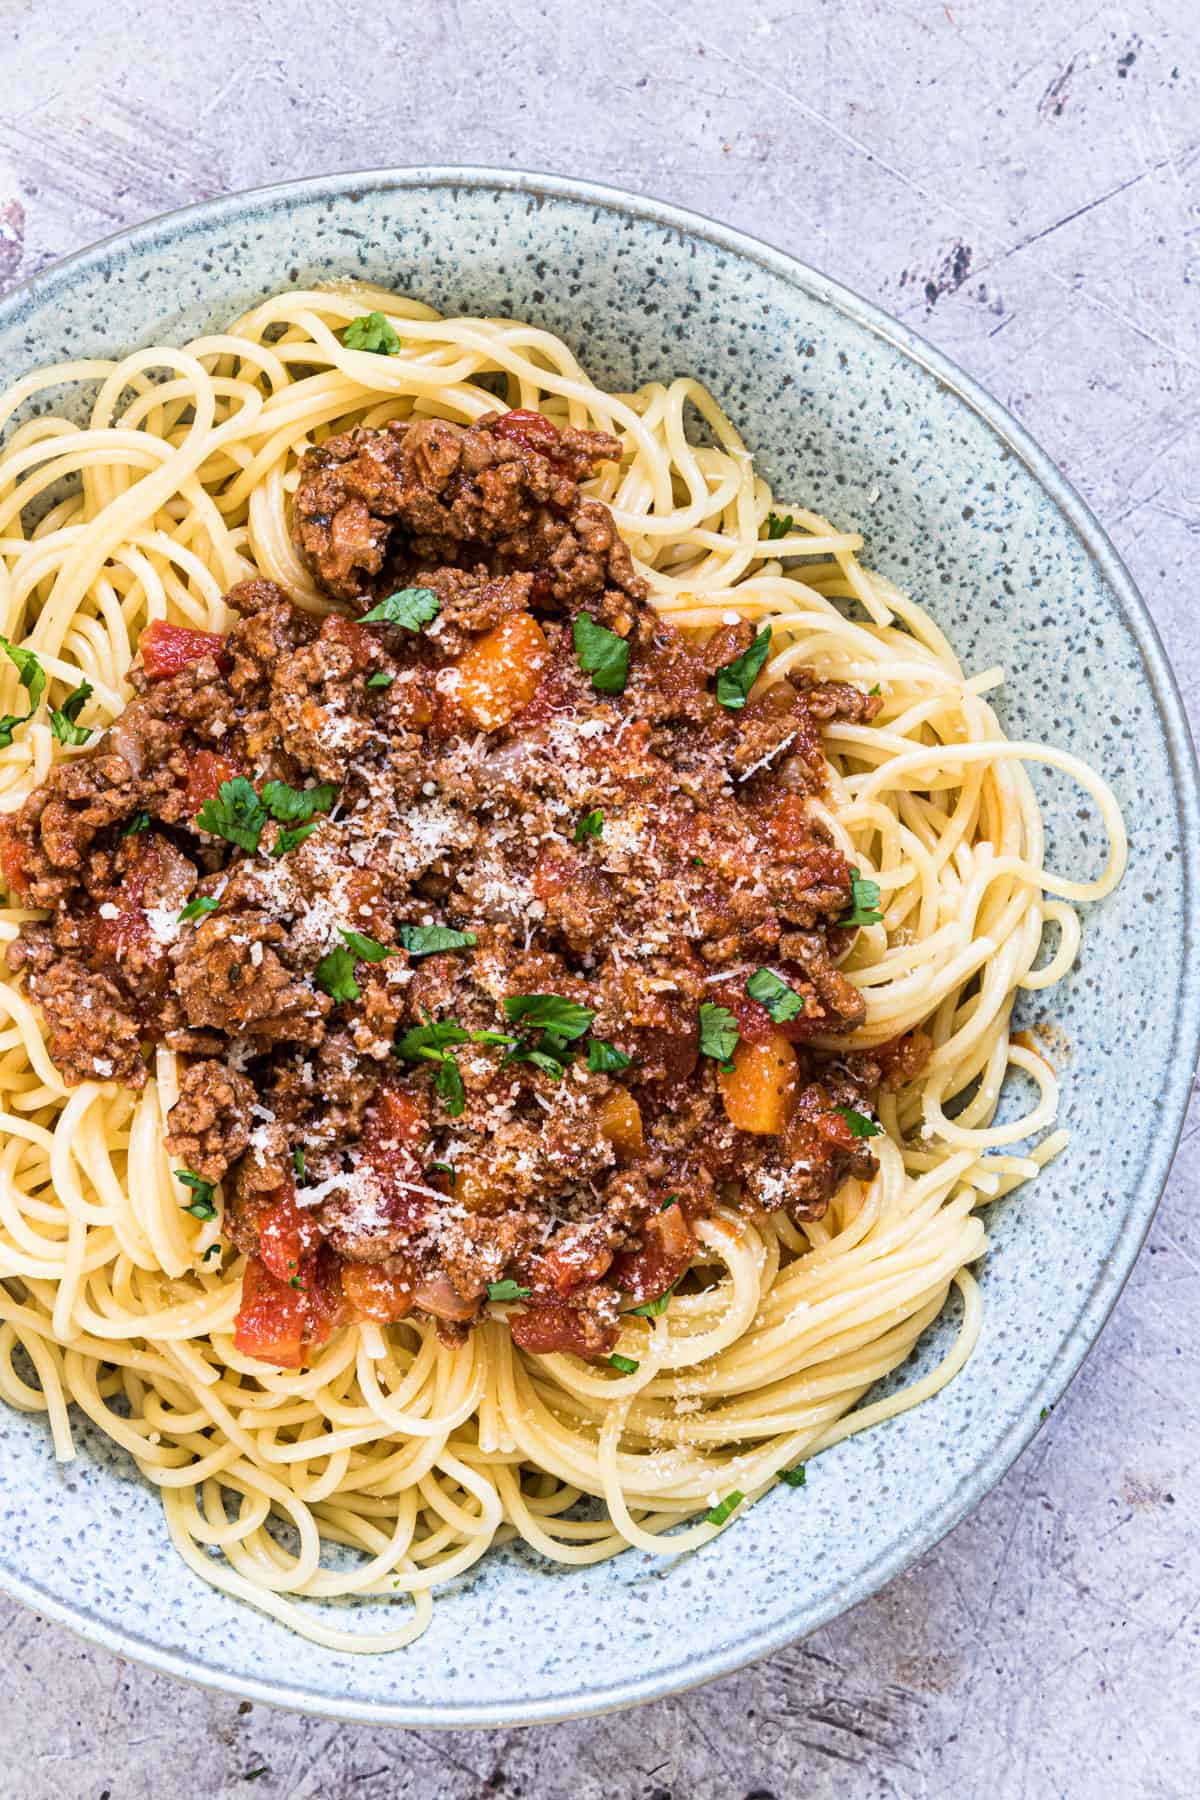 the finished instant pot bolognese sauce served on spaghetti noodles